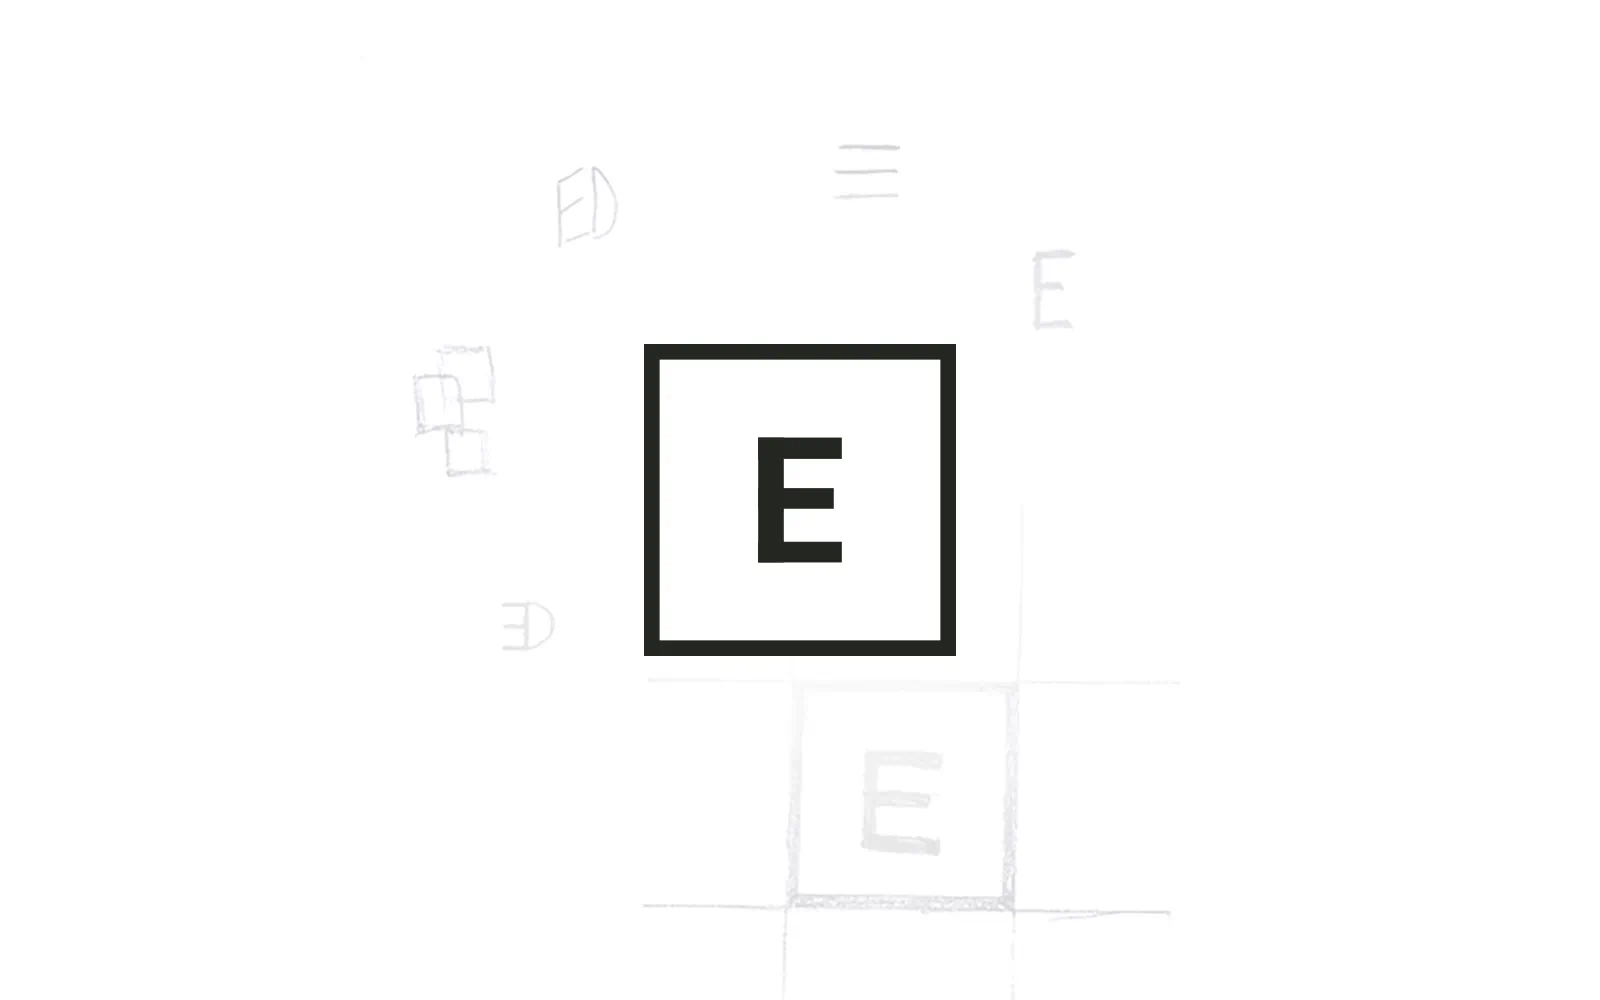 The modern, minimalist and black and white Ed Bartholomew logo, shows a white square with a black border, and a black ‘E’ positioned in the middle. The logo is on a white background showing initial sketches of the logo